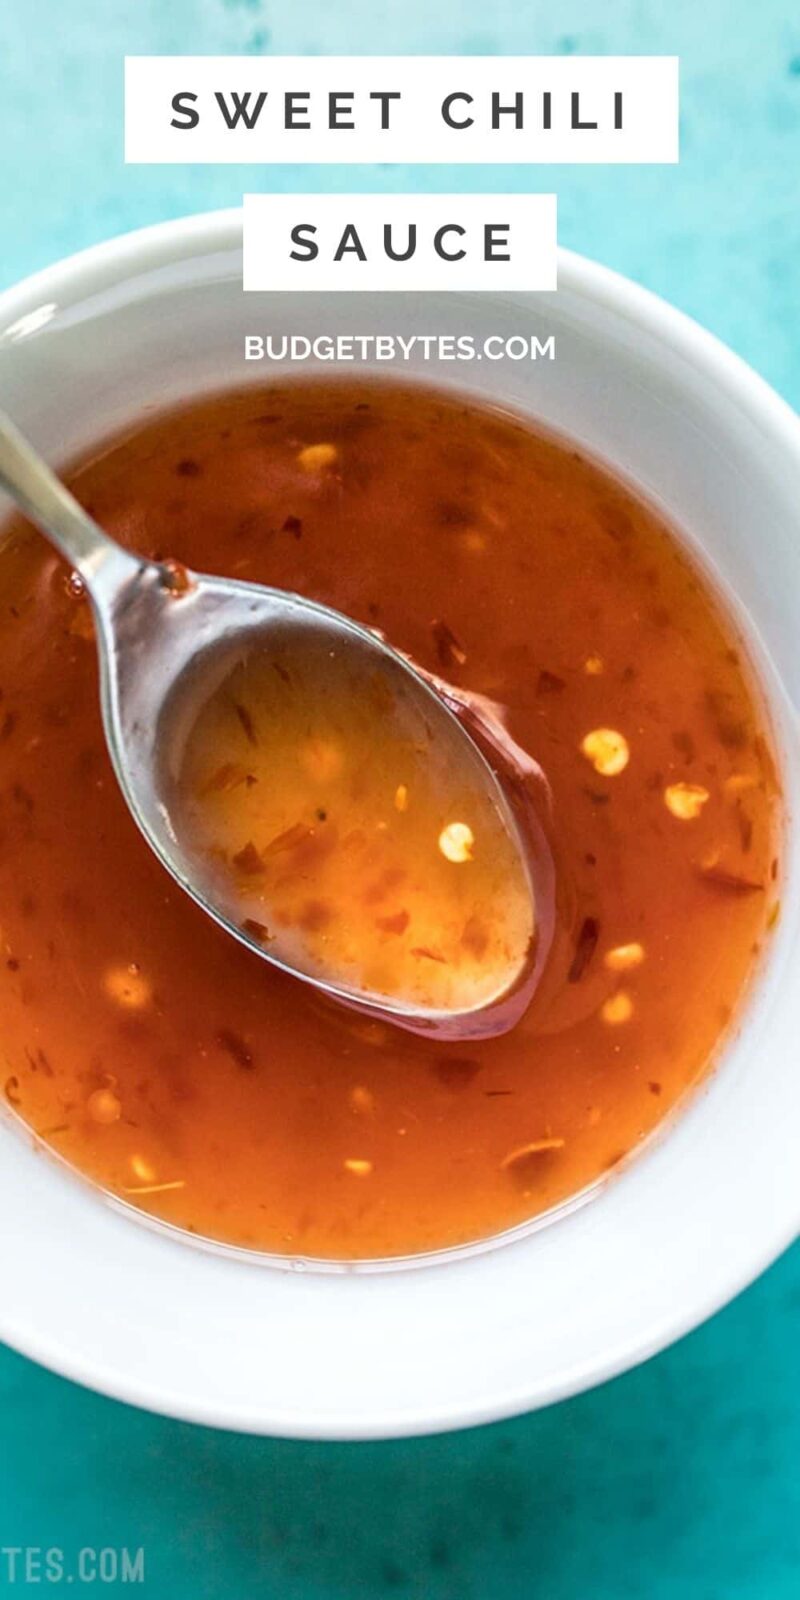 Close up of sweet chili sauce in a bowl with a spoon, title text at the top